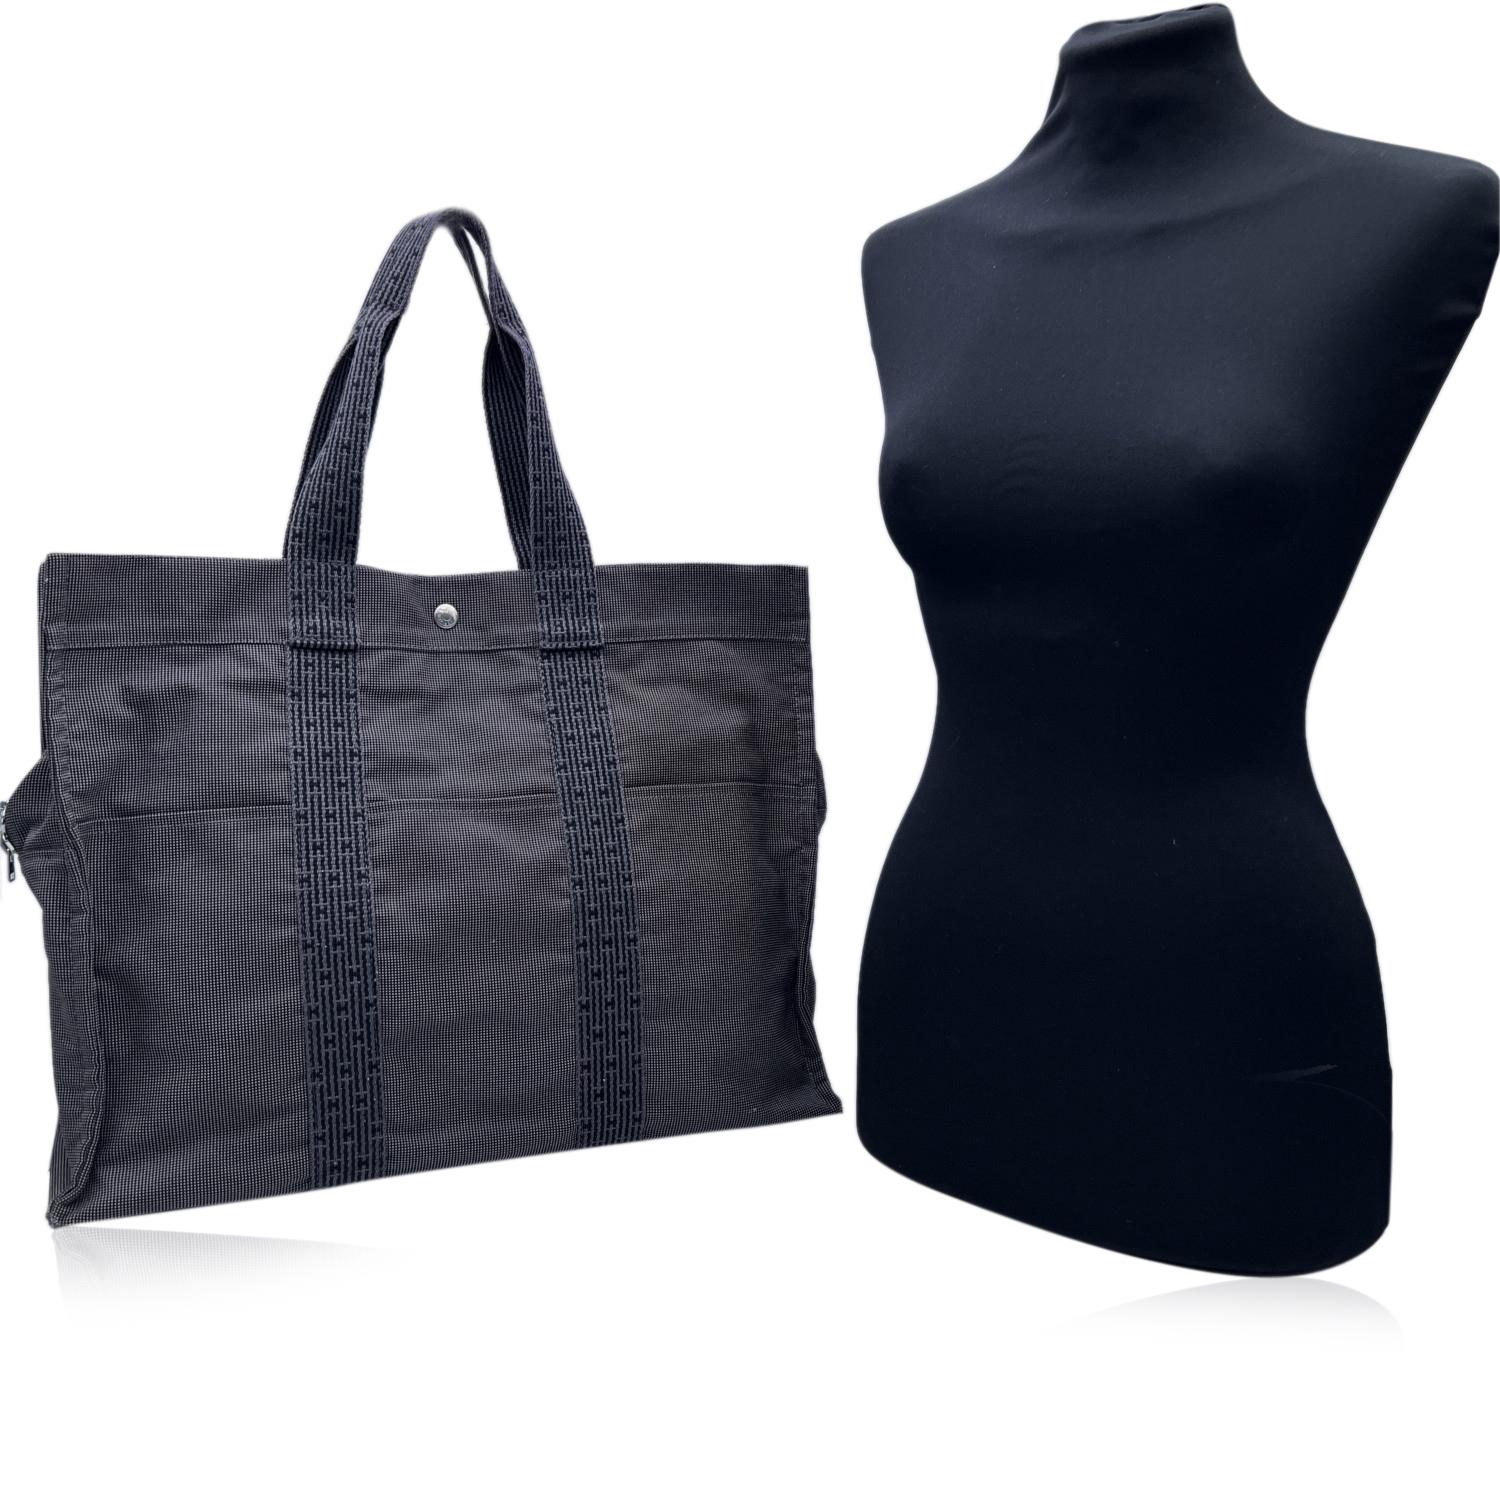 Hermes Canvas Herline Her Line GM Tote Bag in grey and black colors. Made of a durable canvas. The tote has durable strap handles of a patterned Hermes H canvas. 3 open pockets on the front. Composition; 69% Polyamide, 31% Polyester. 3 snap button